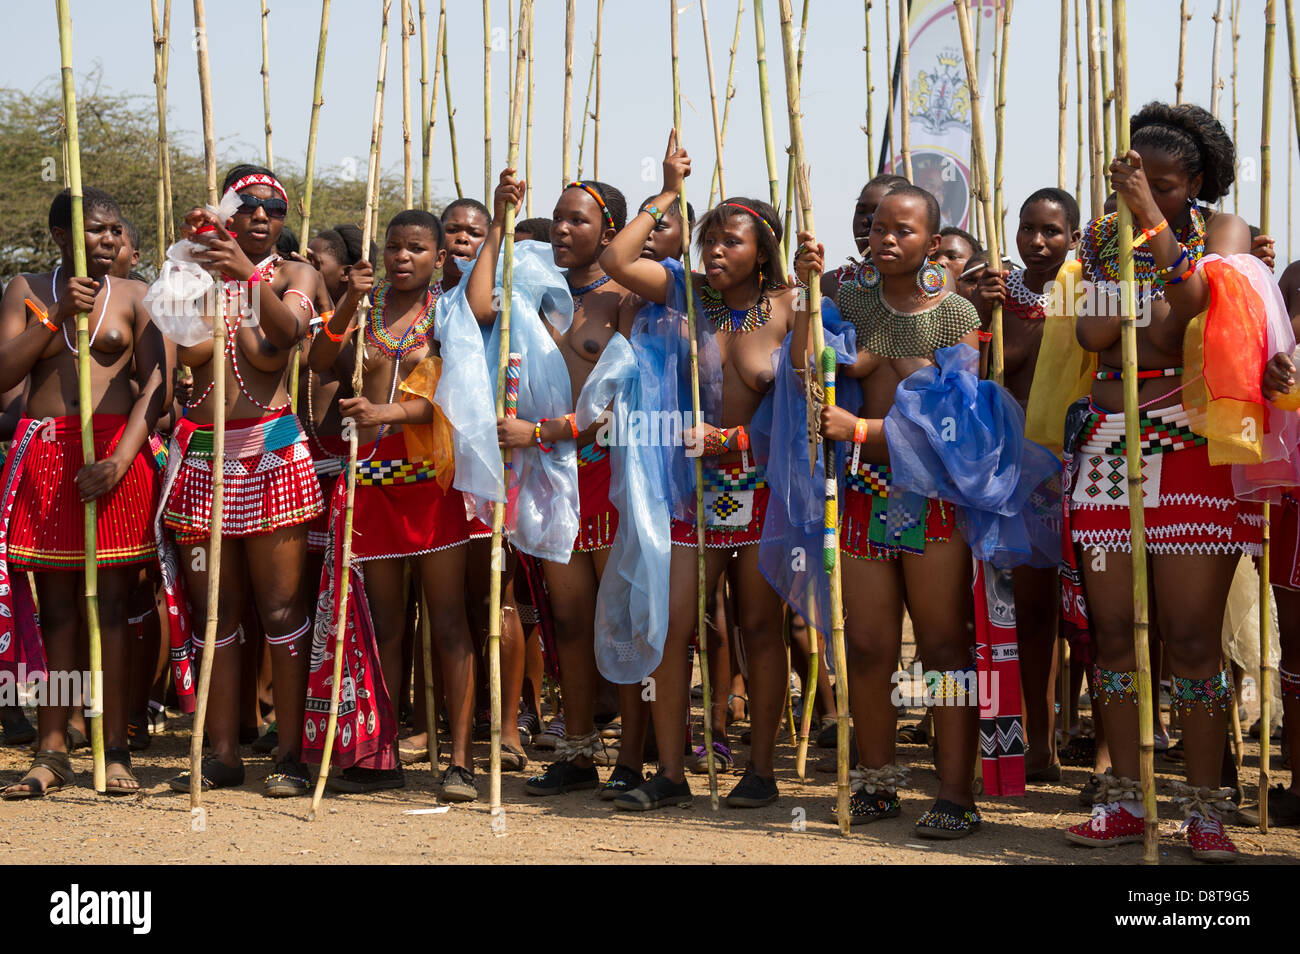 Zulu Maidens Deliver Reed Sticks To The King Zulu Reed Dance At Enyokeni Palace Nongoma South